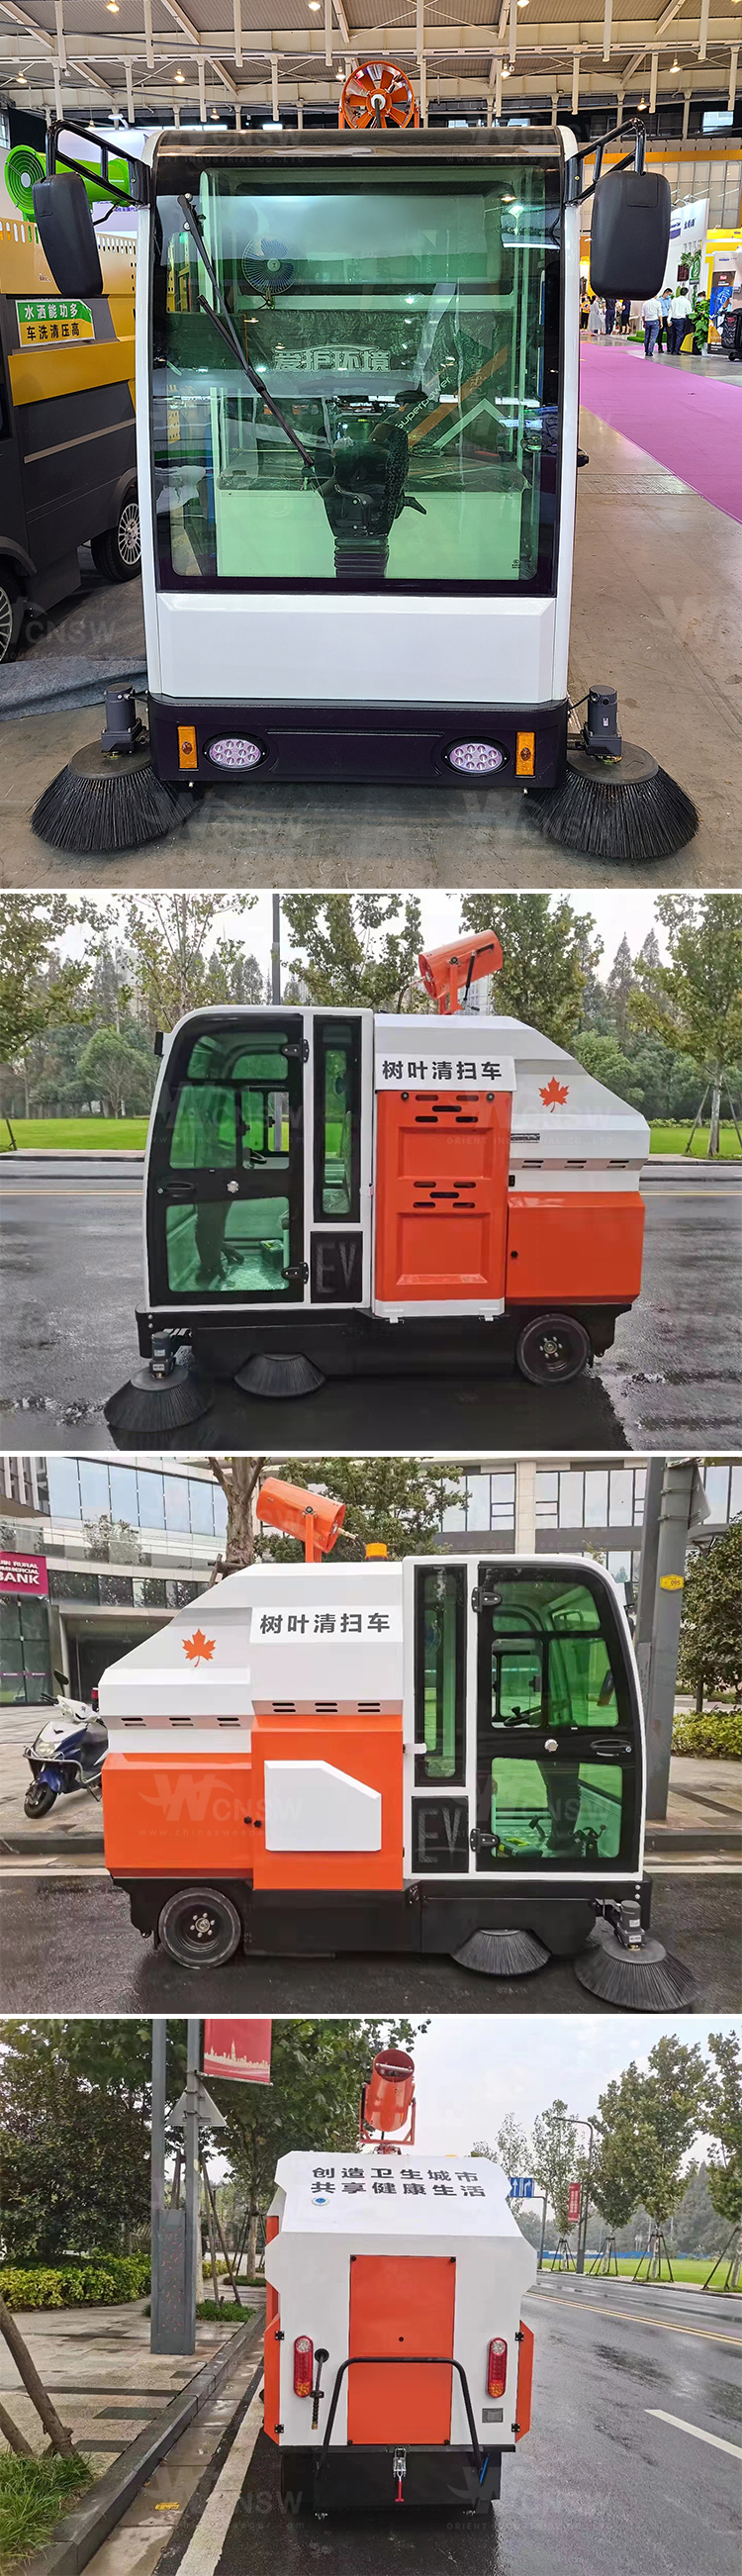 street cleaning equipment